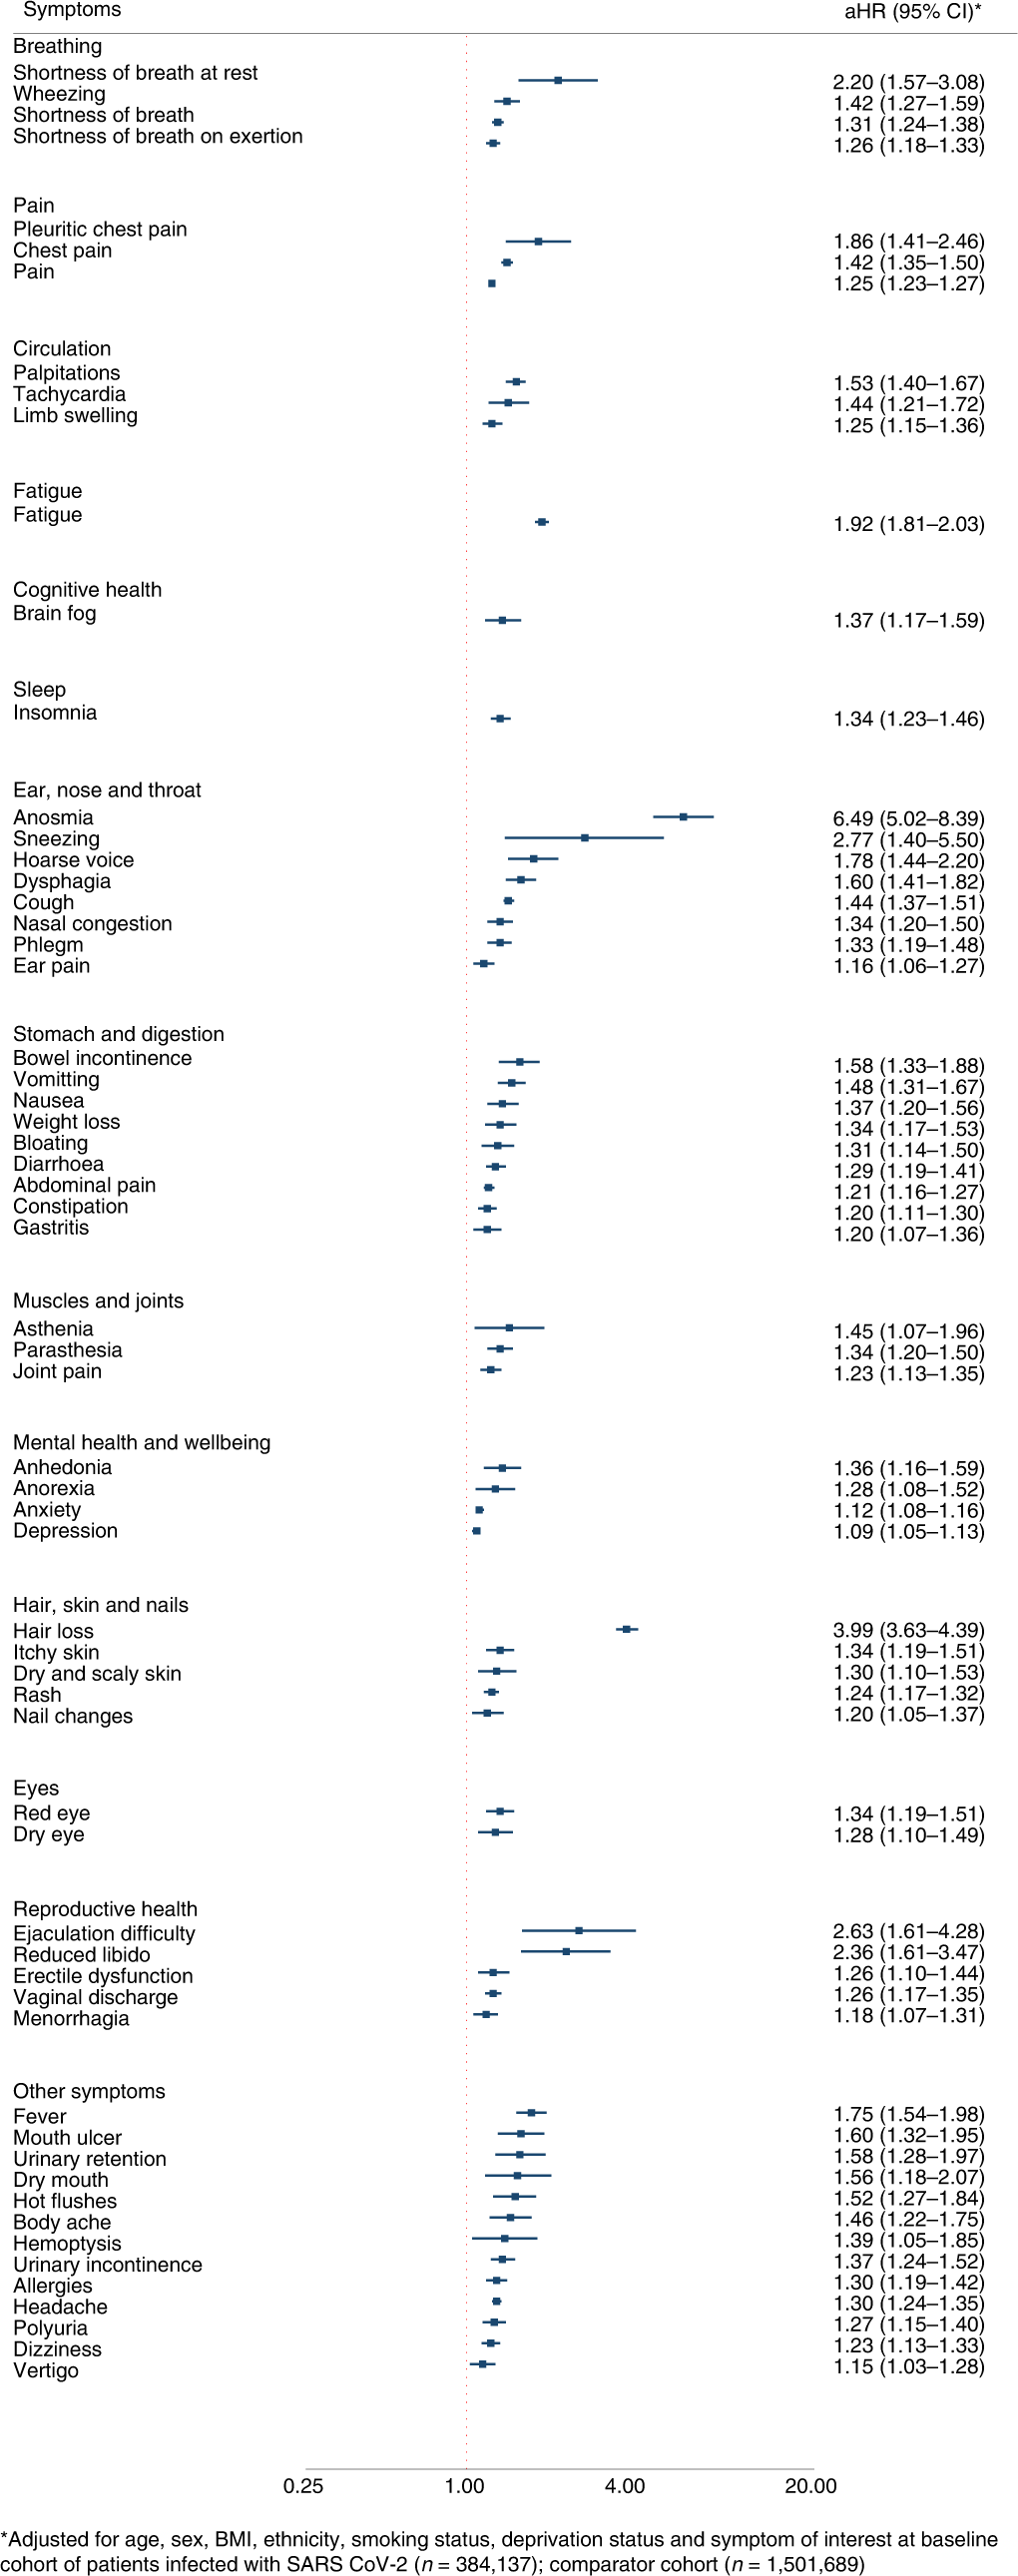 Symptoms and risk factors for long COVID in non-hospitalized adults |  Nature Medicine